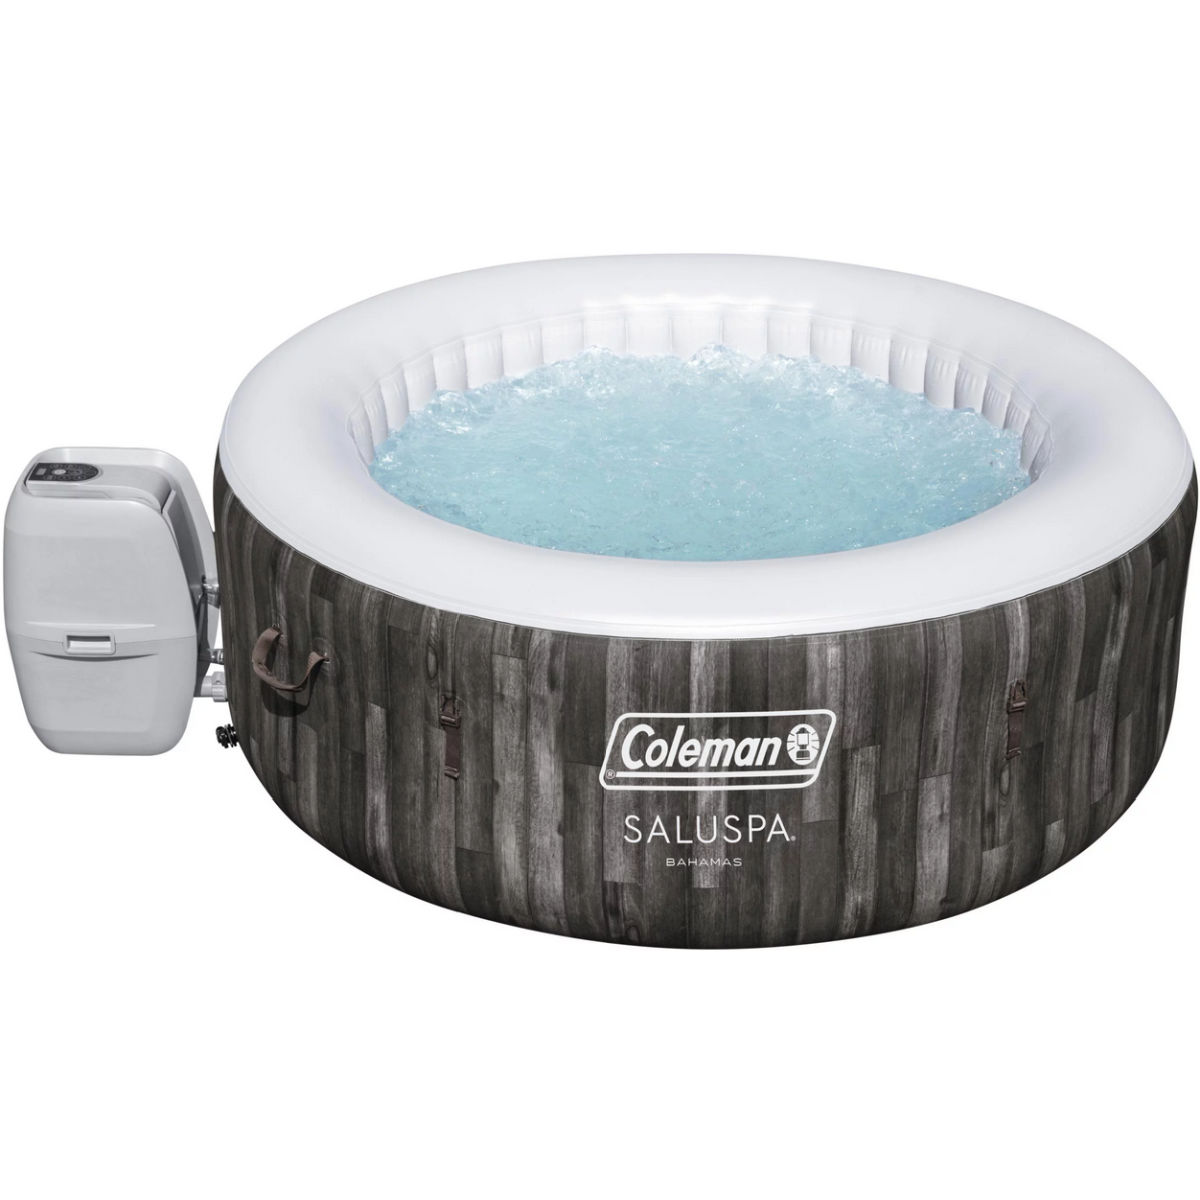 Coleman Bahamas AirJet Inflatable 4-Person Hot Tub